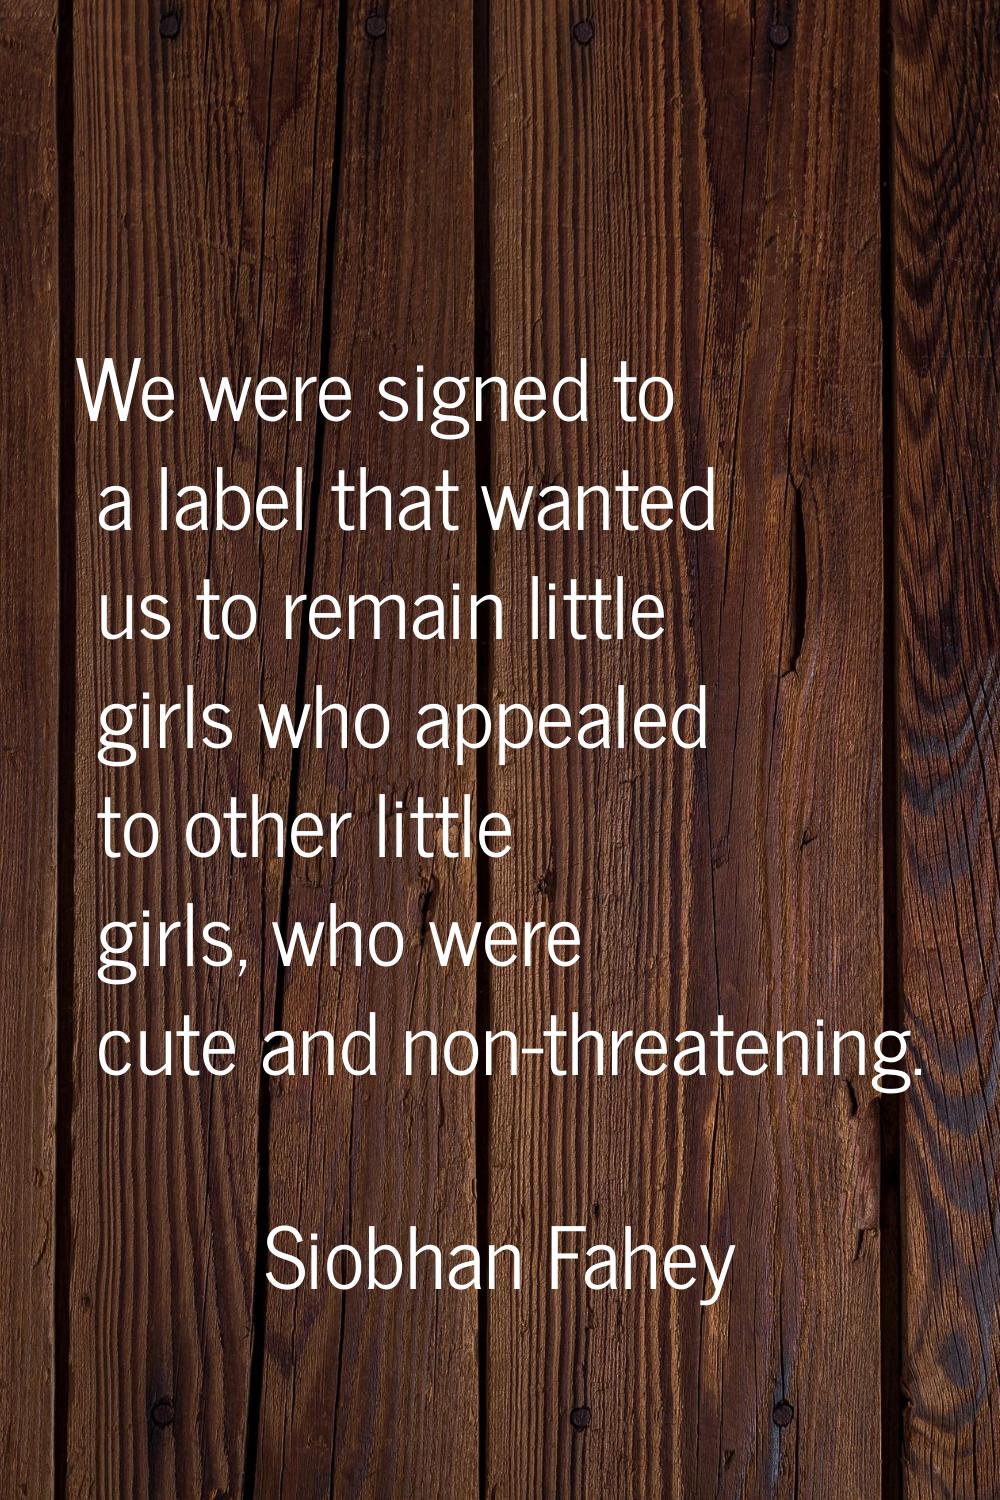 We were signed to a label that wanted us to remain little girls who appealed to other little girls,